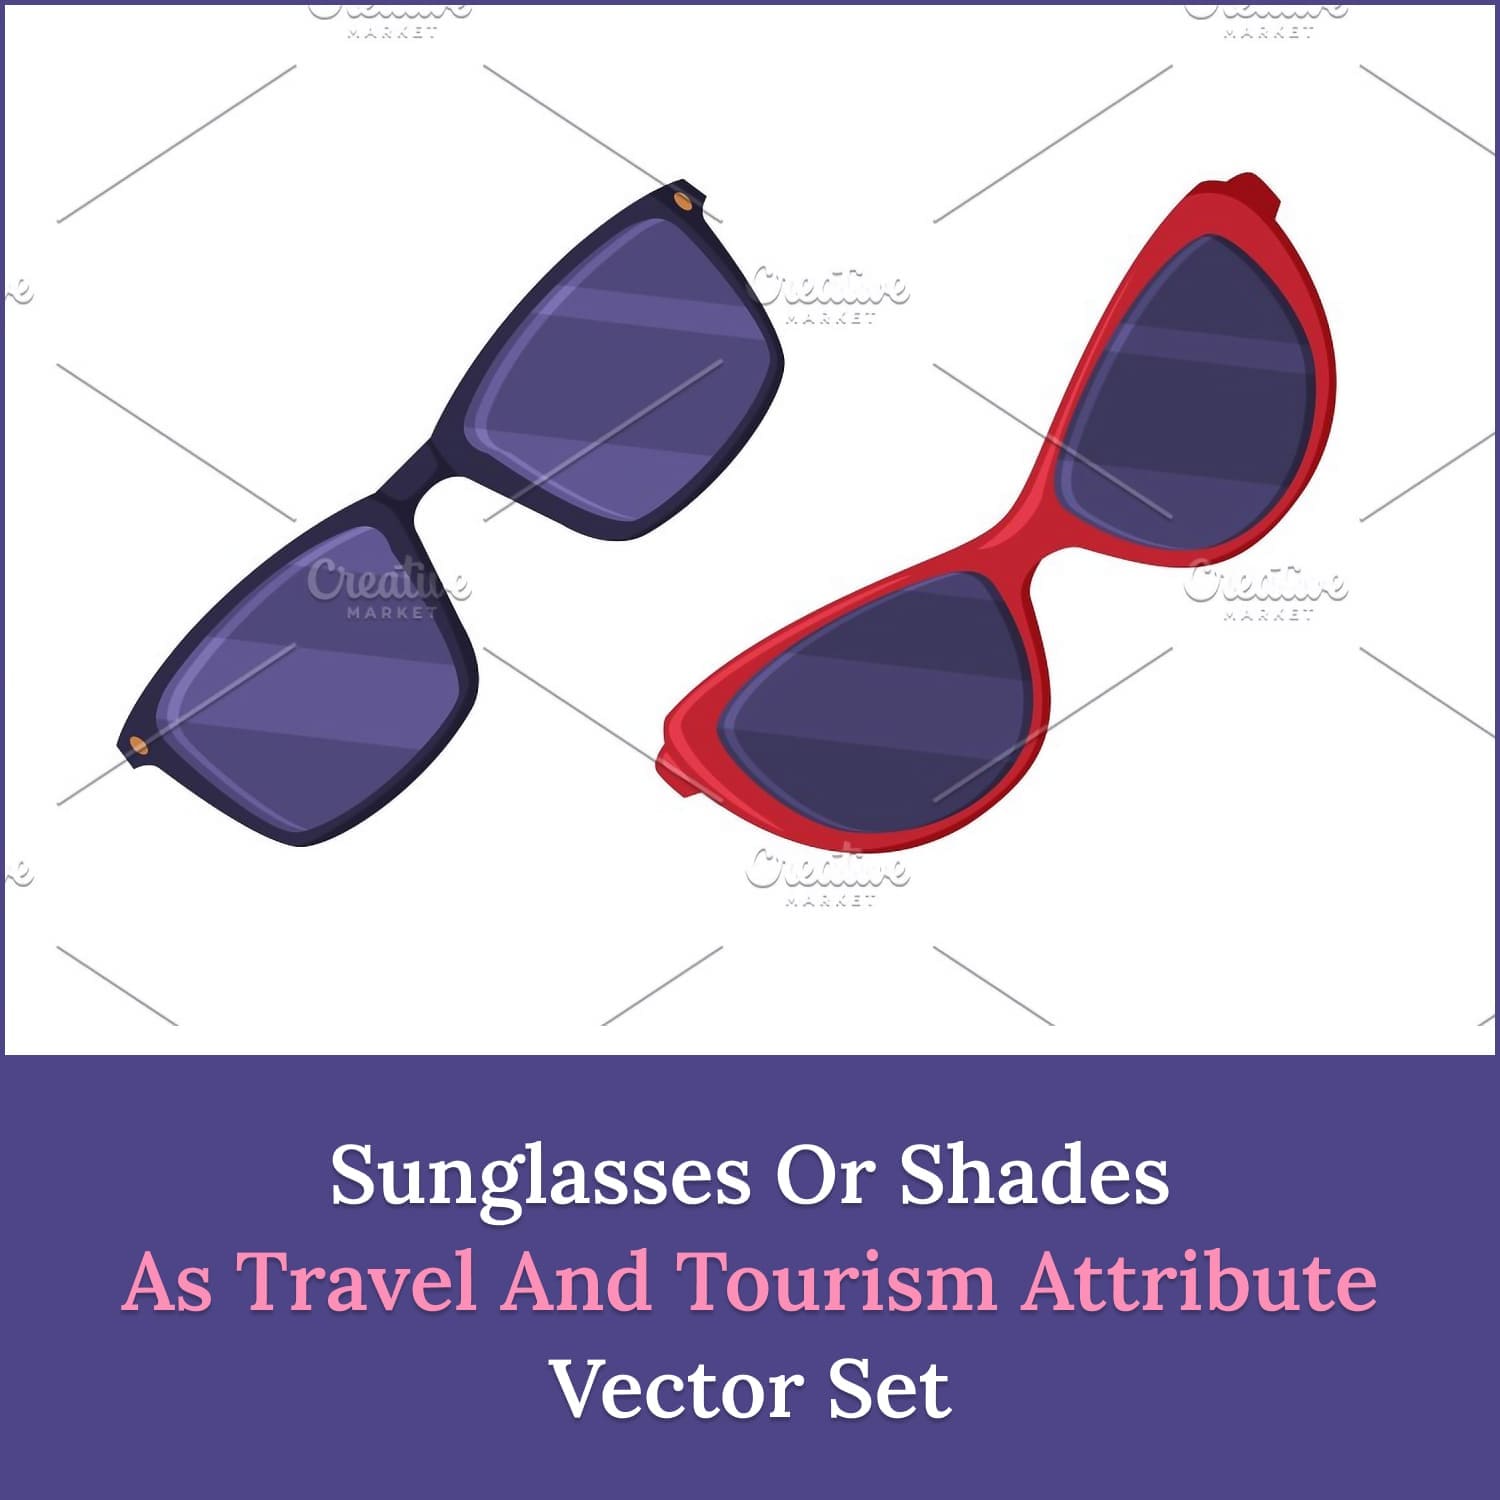 Sunglasses or shades as travel and tourism attribute vector set, main picture.